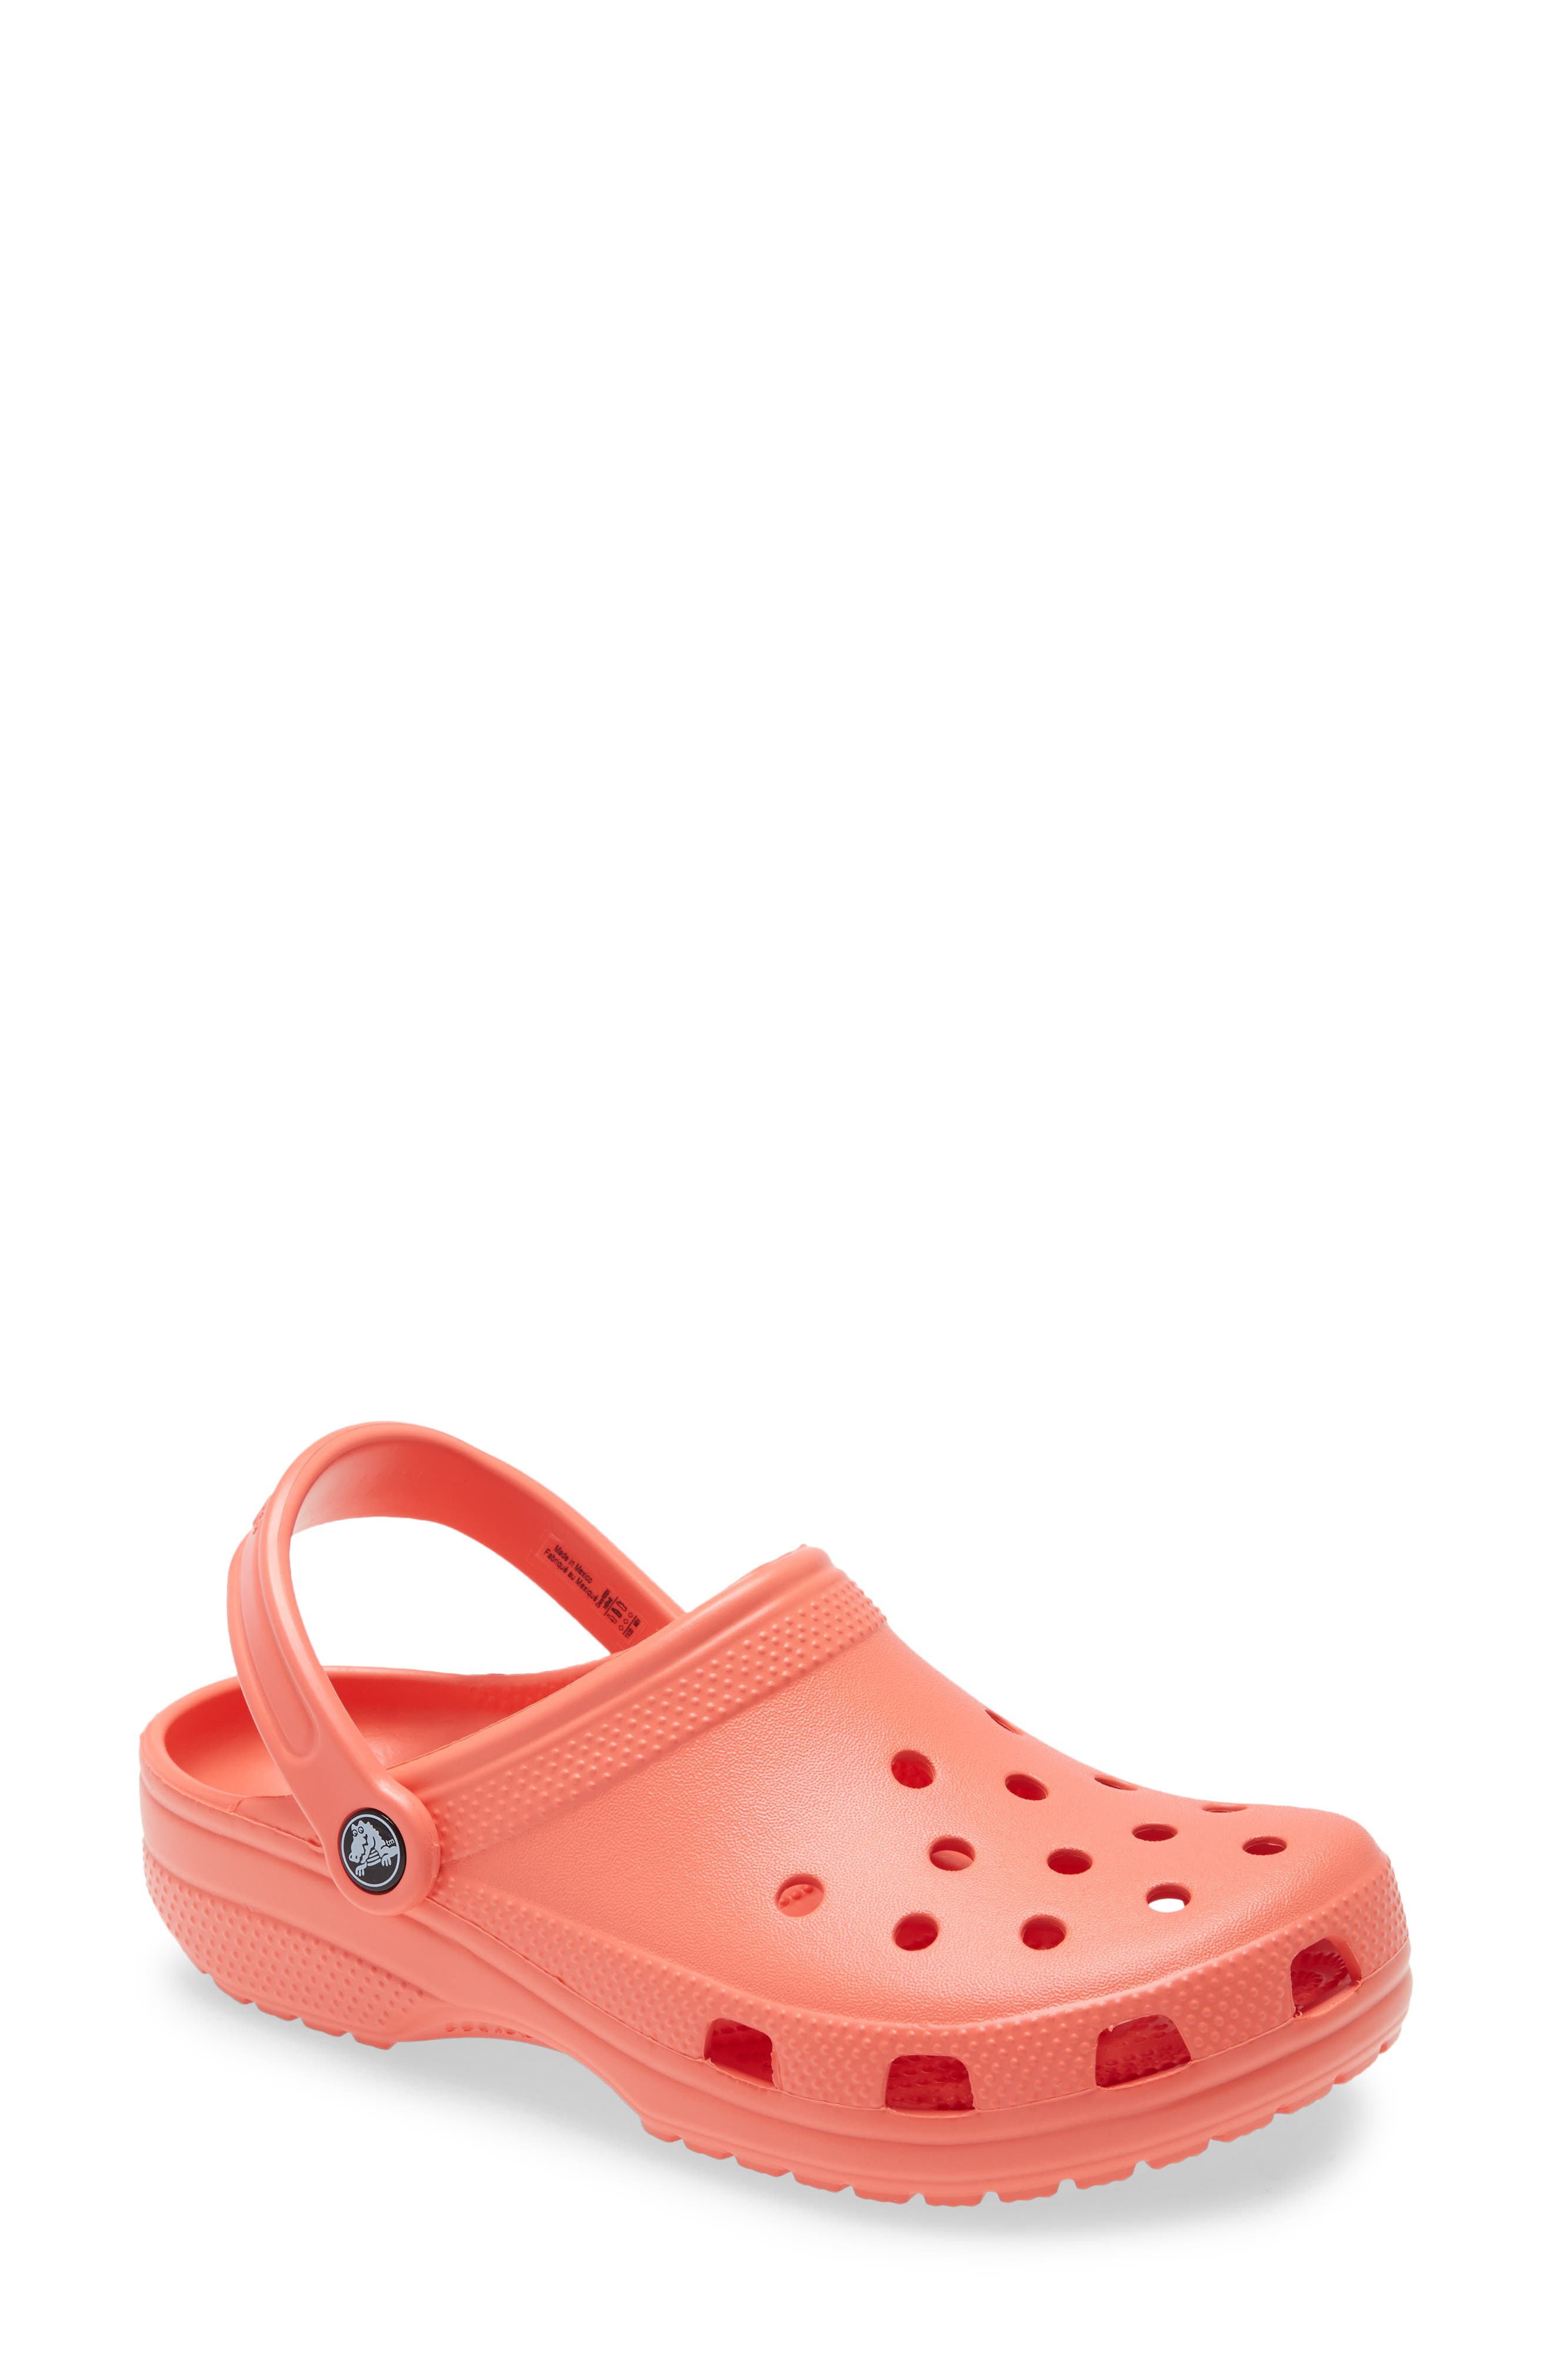 coral slip on shoes